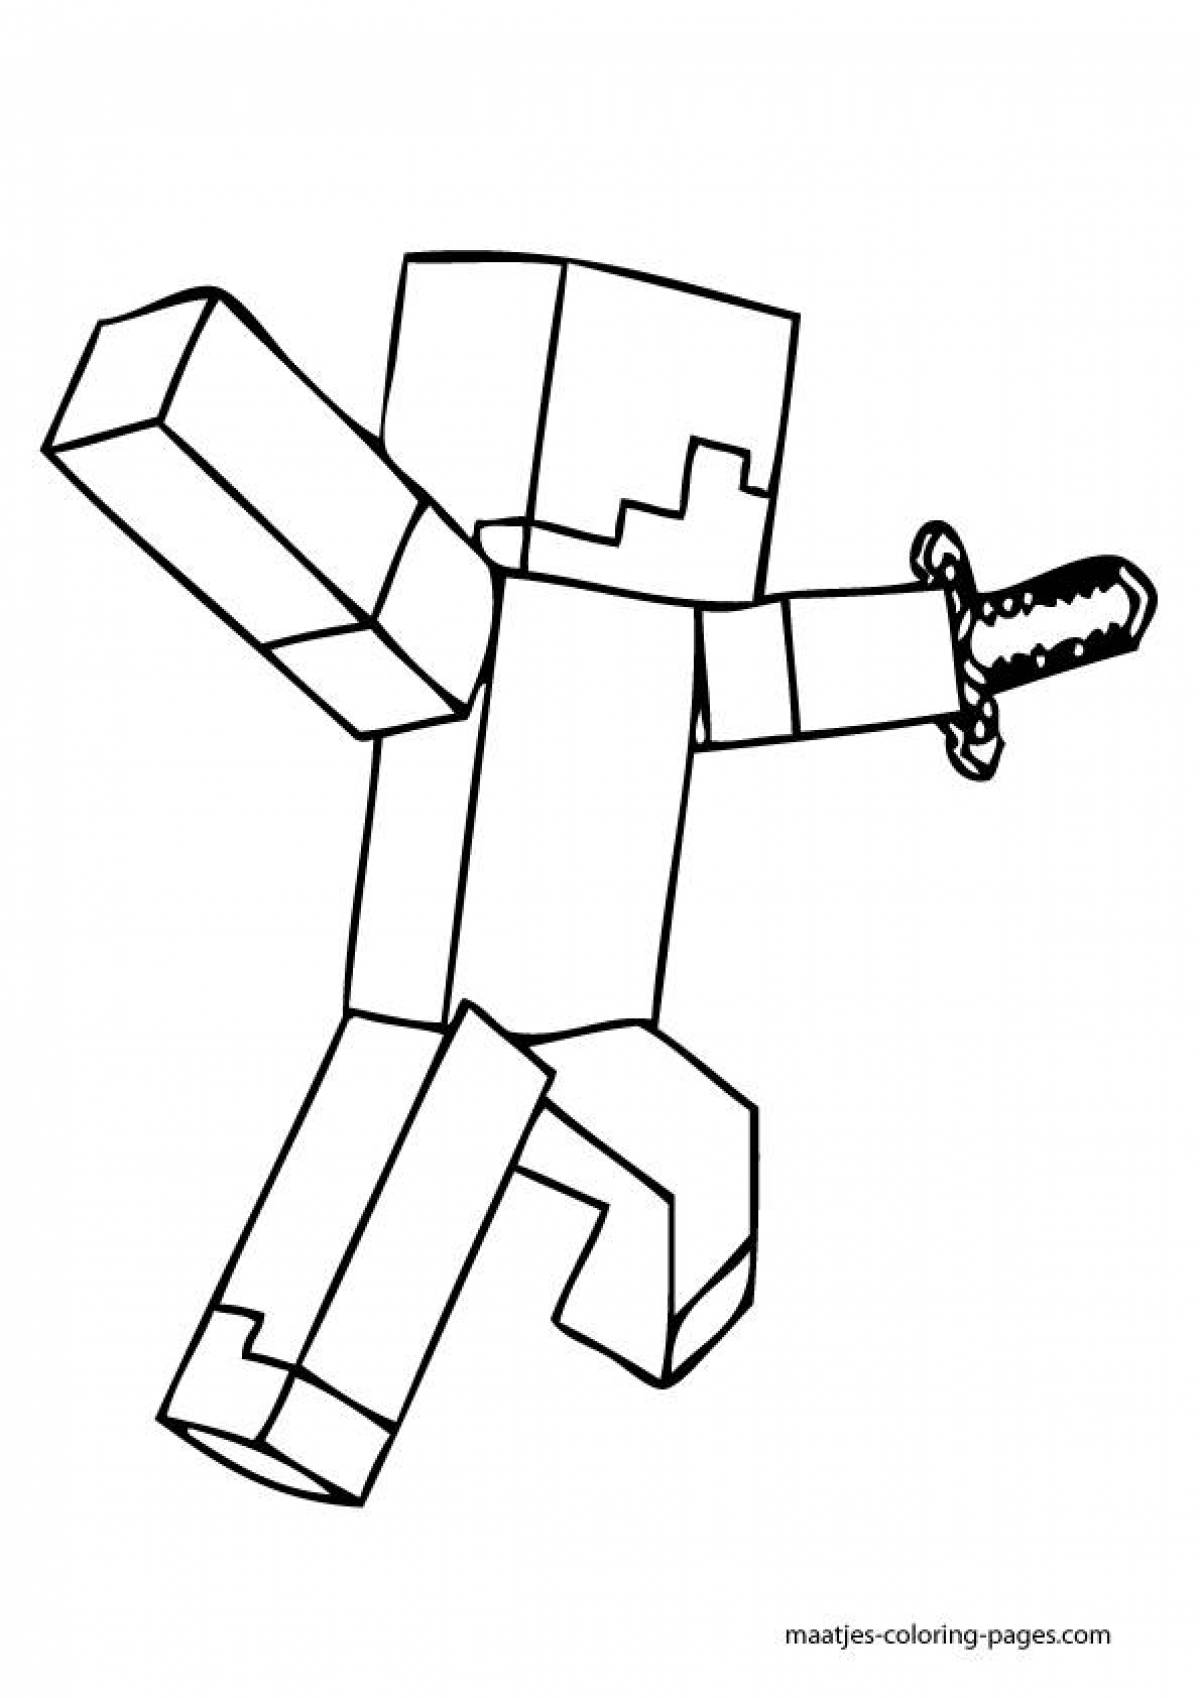 Lovely minecraft coloring page